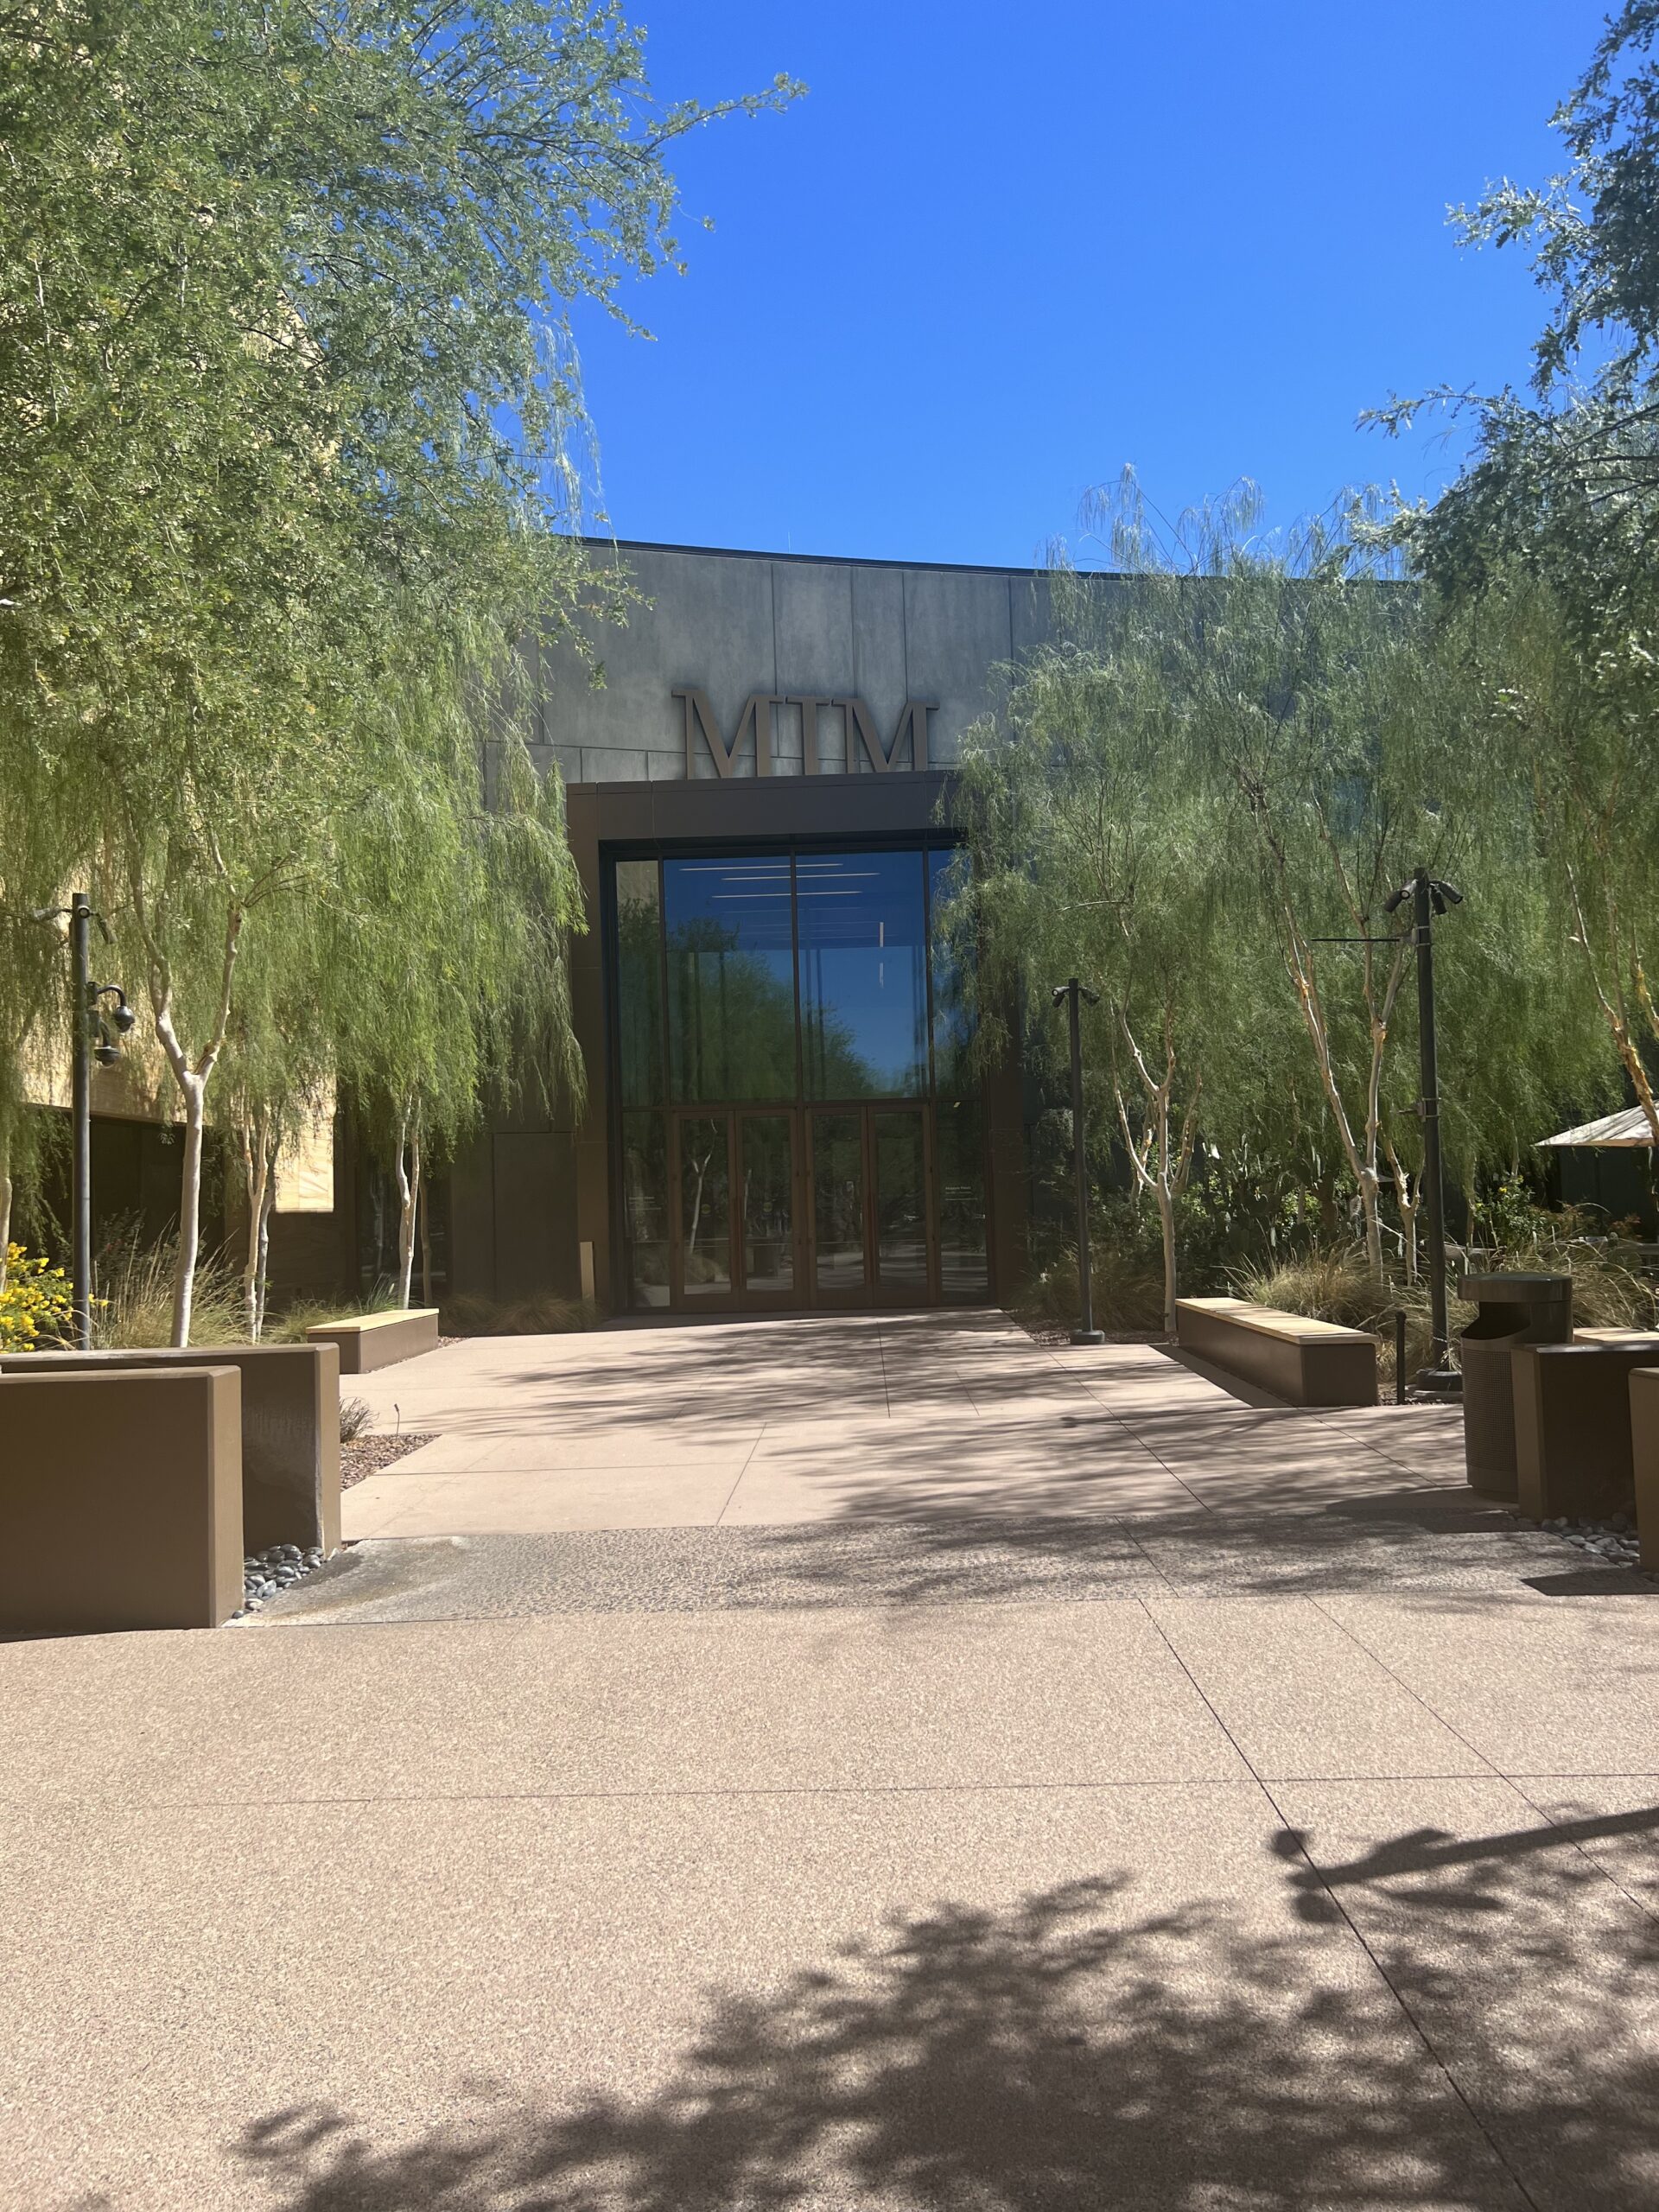 alt txt = "Musical Instrument Museum in Phoenix Entrance surrounded by greenery."